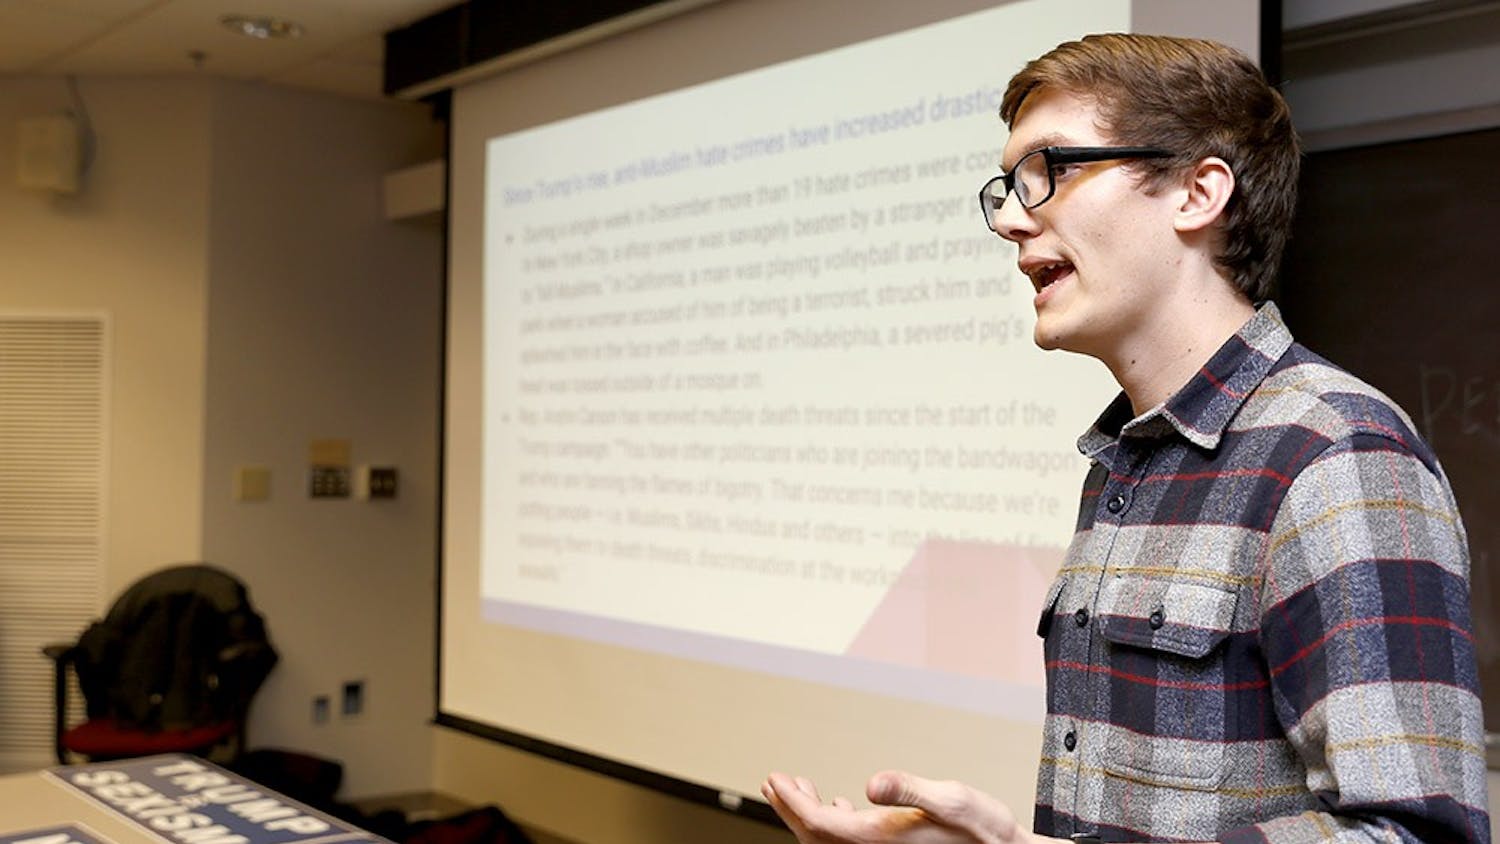 Kegan Ferguson, president of College Democrats at IU, speaks why Donald Trump should not be elected as a president Wednesday at Wylie Hall Room 015. College Democrats at IU had Trumpocalypse 2016 event to discuss issues of Donald Trump's presidential campaign. 